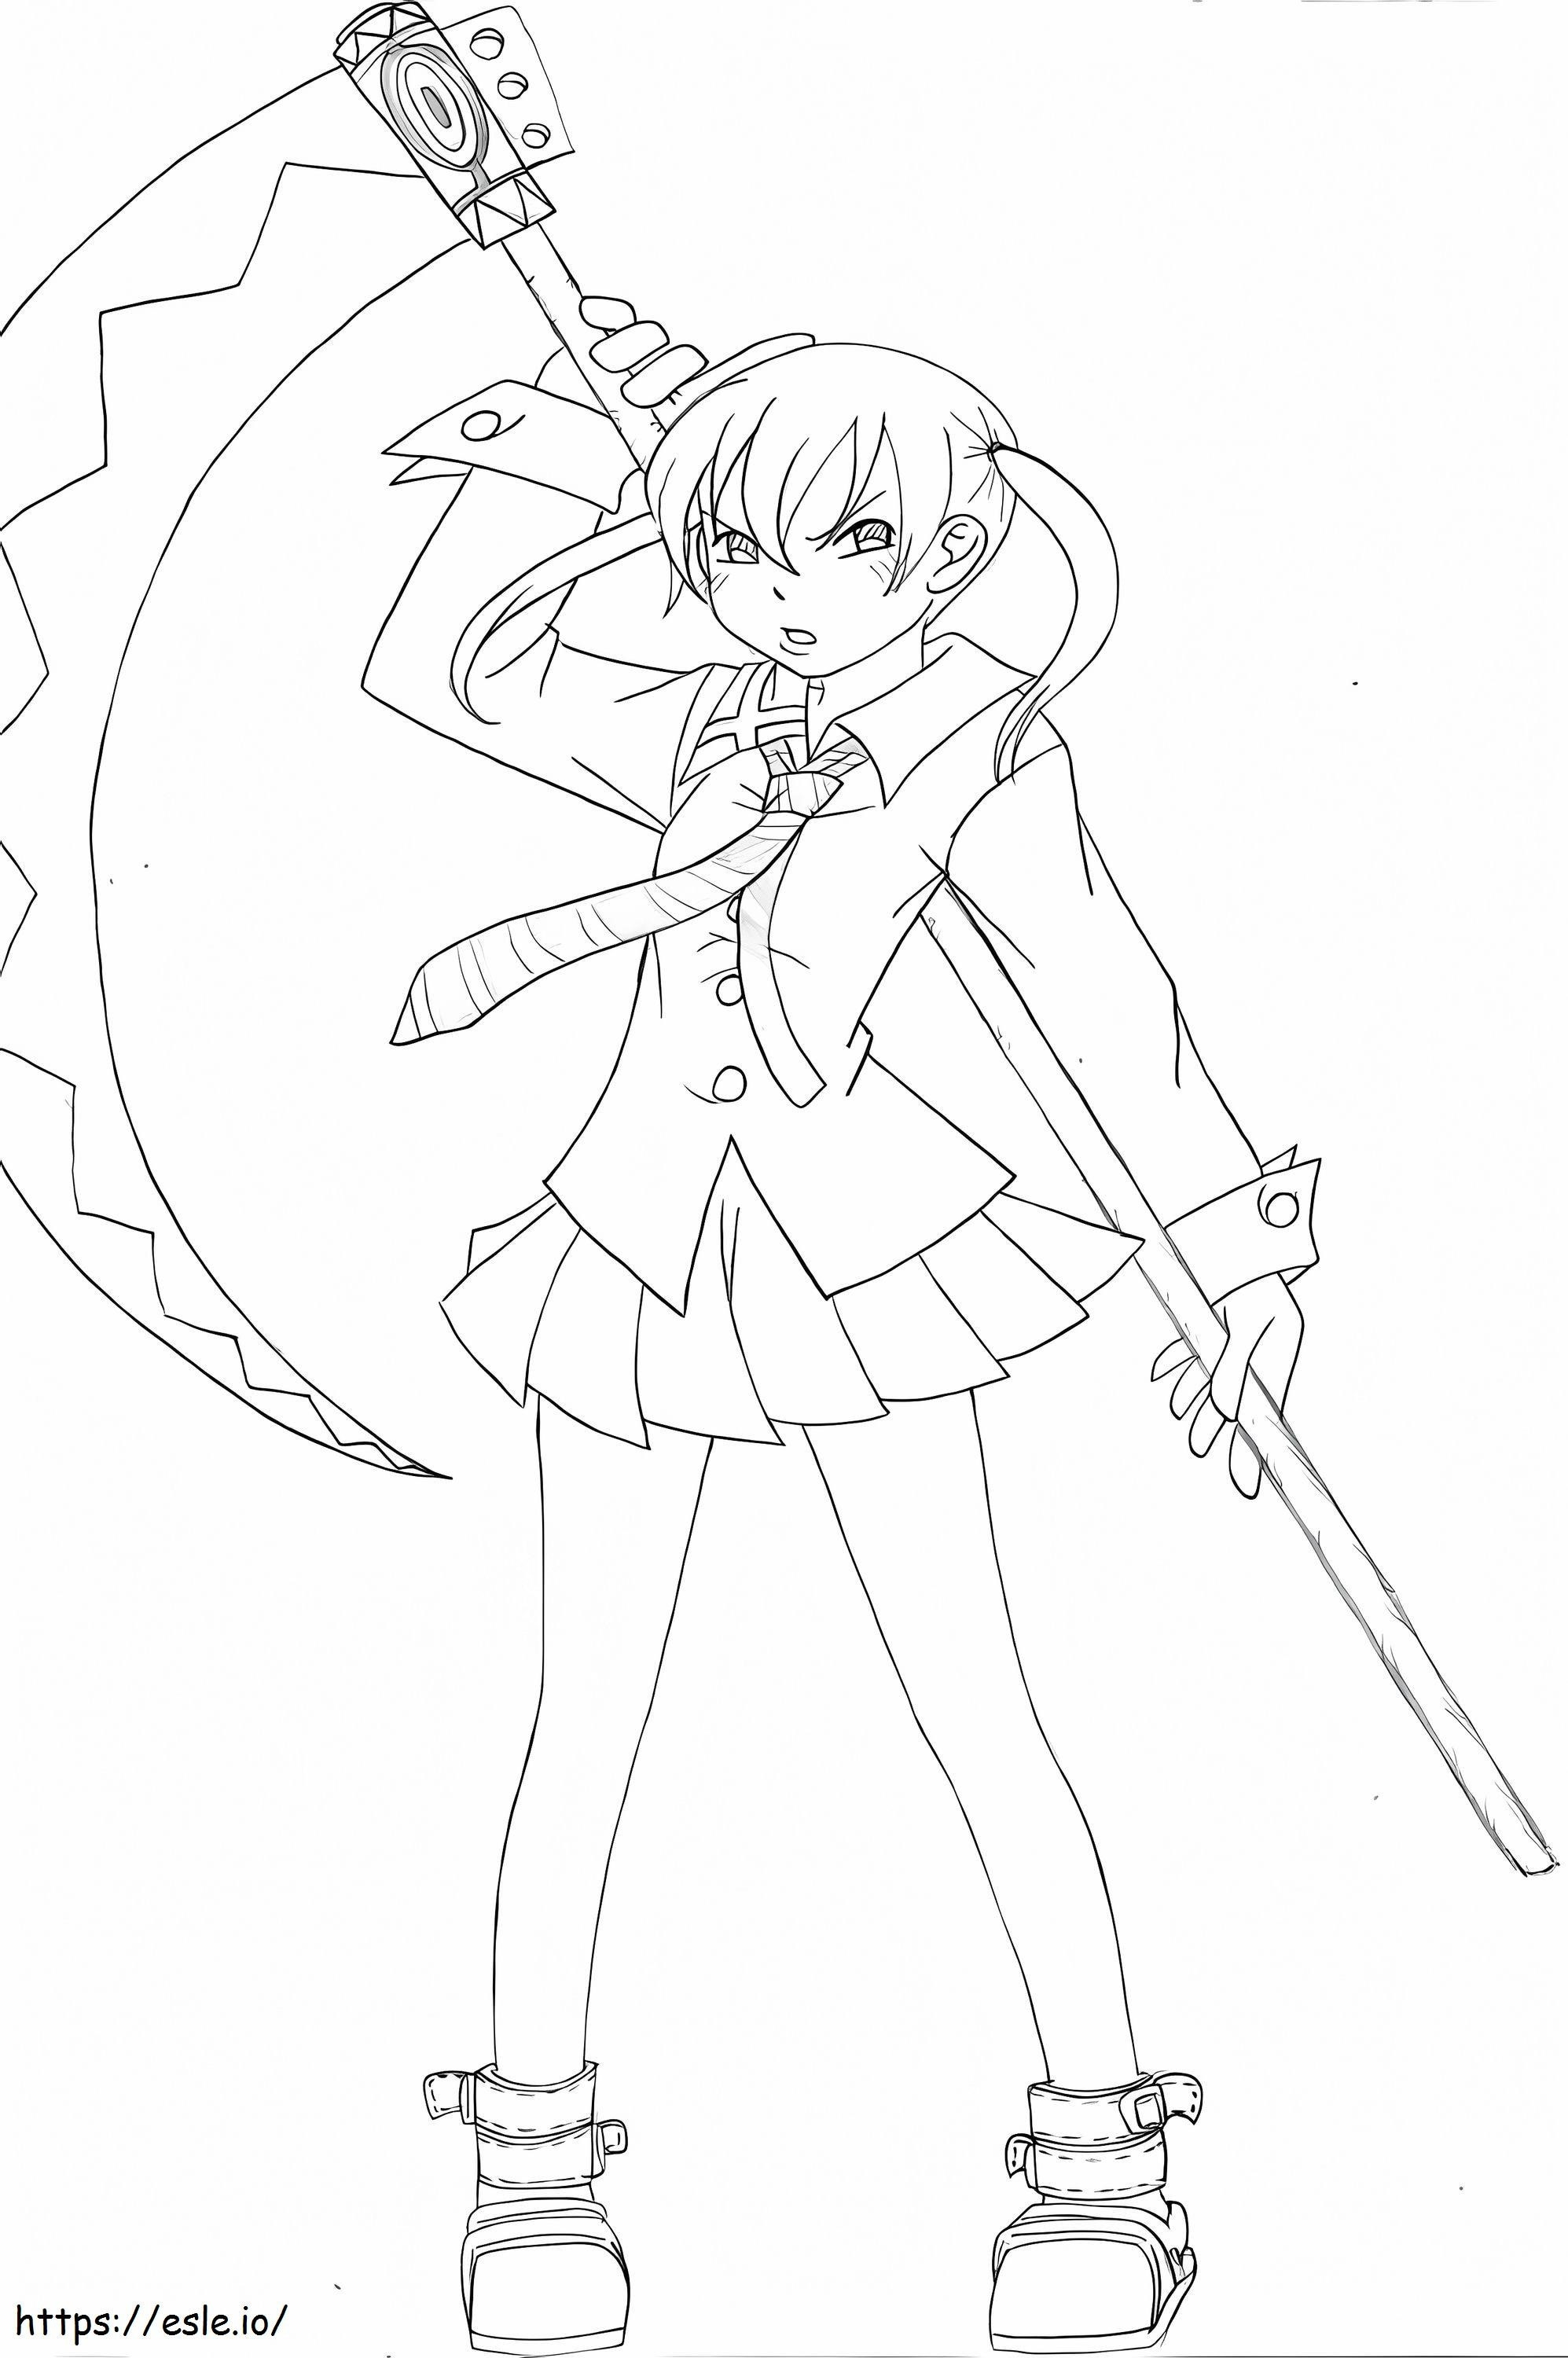 Maka Albarn From Soul Eater 2 coloring page